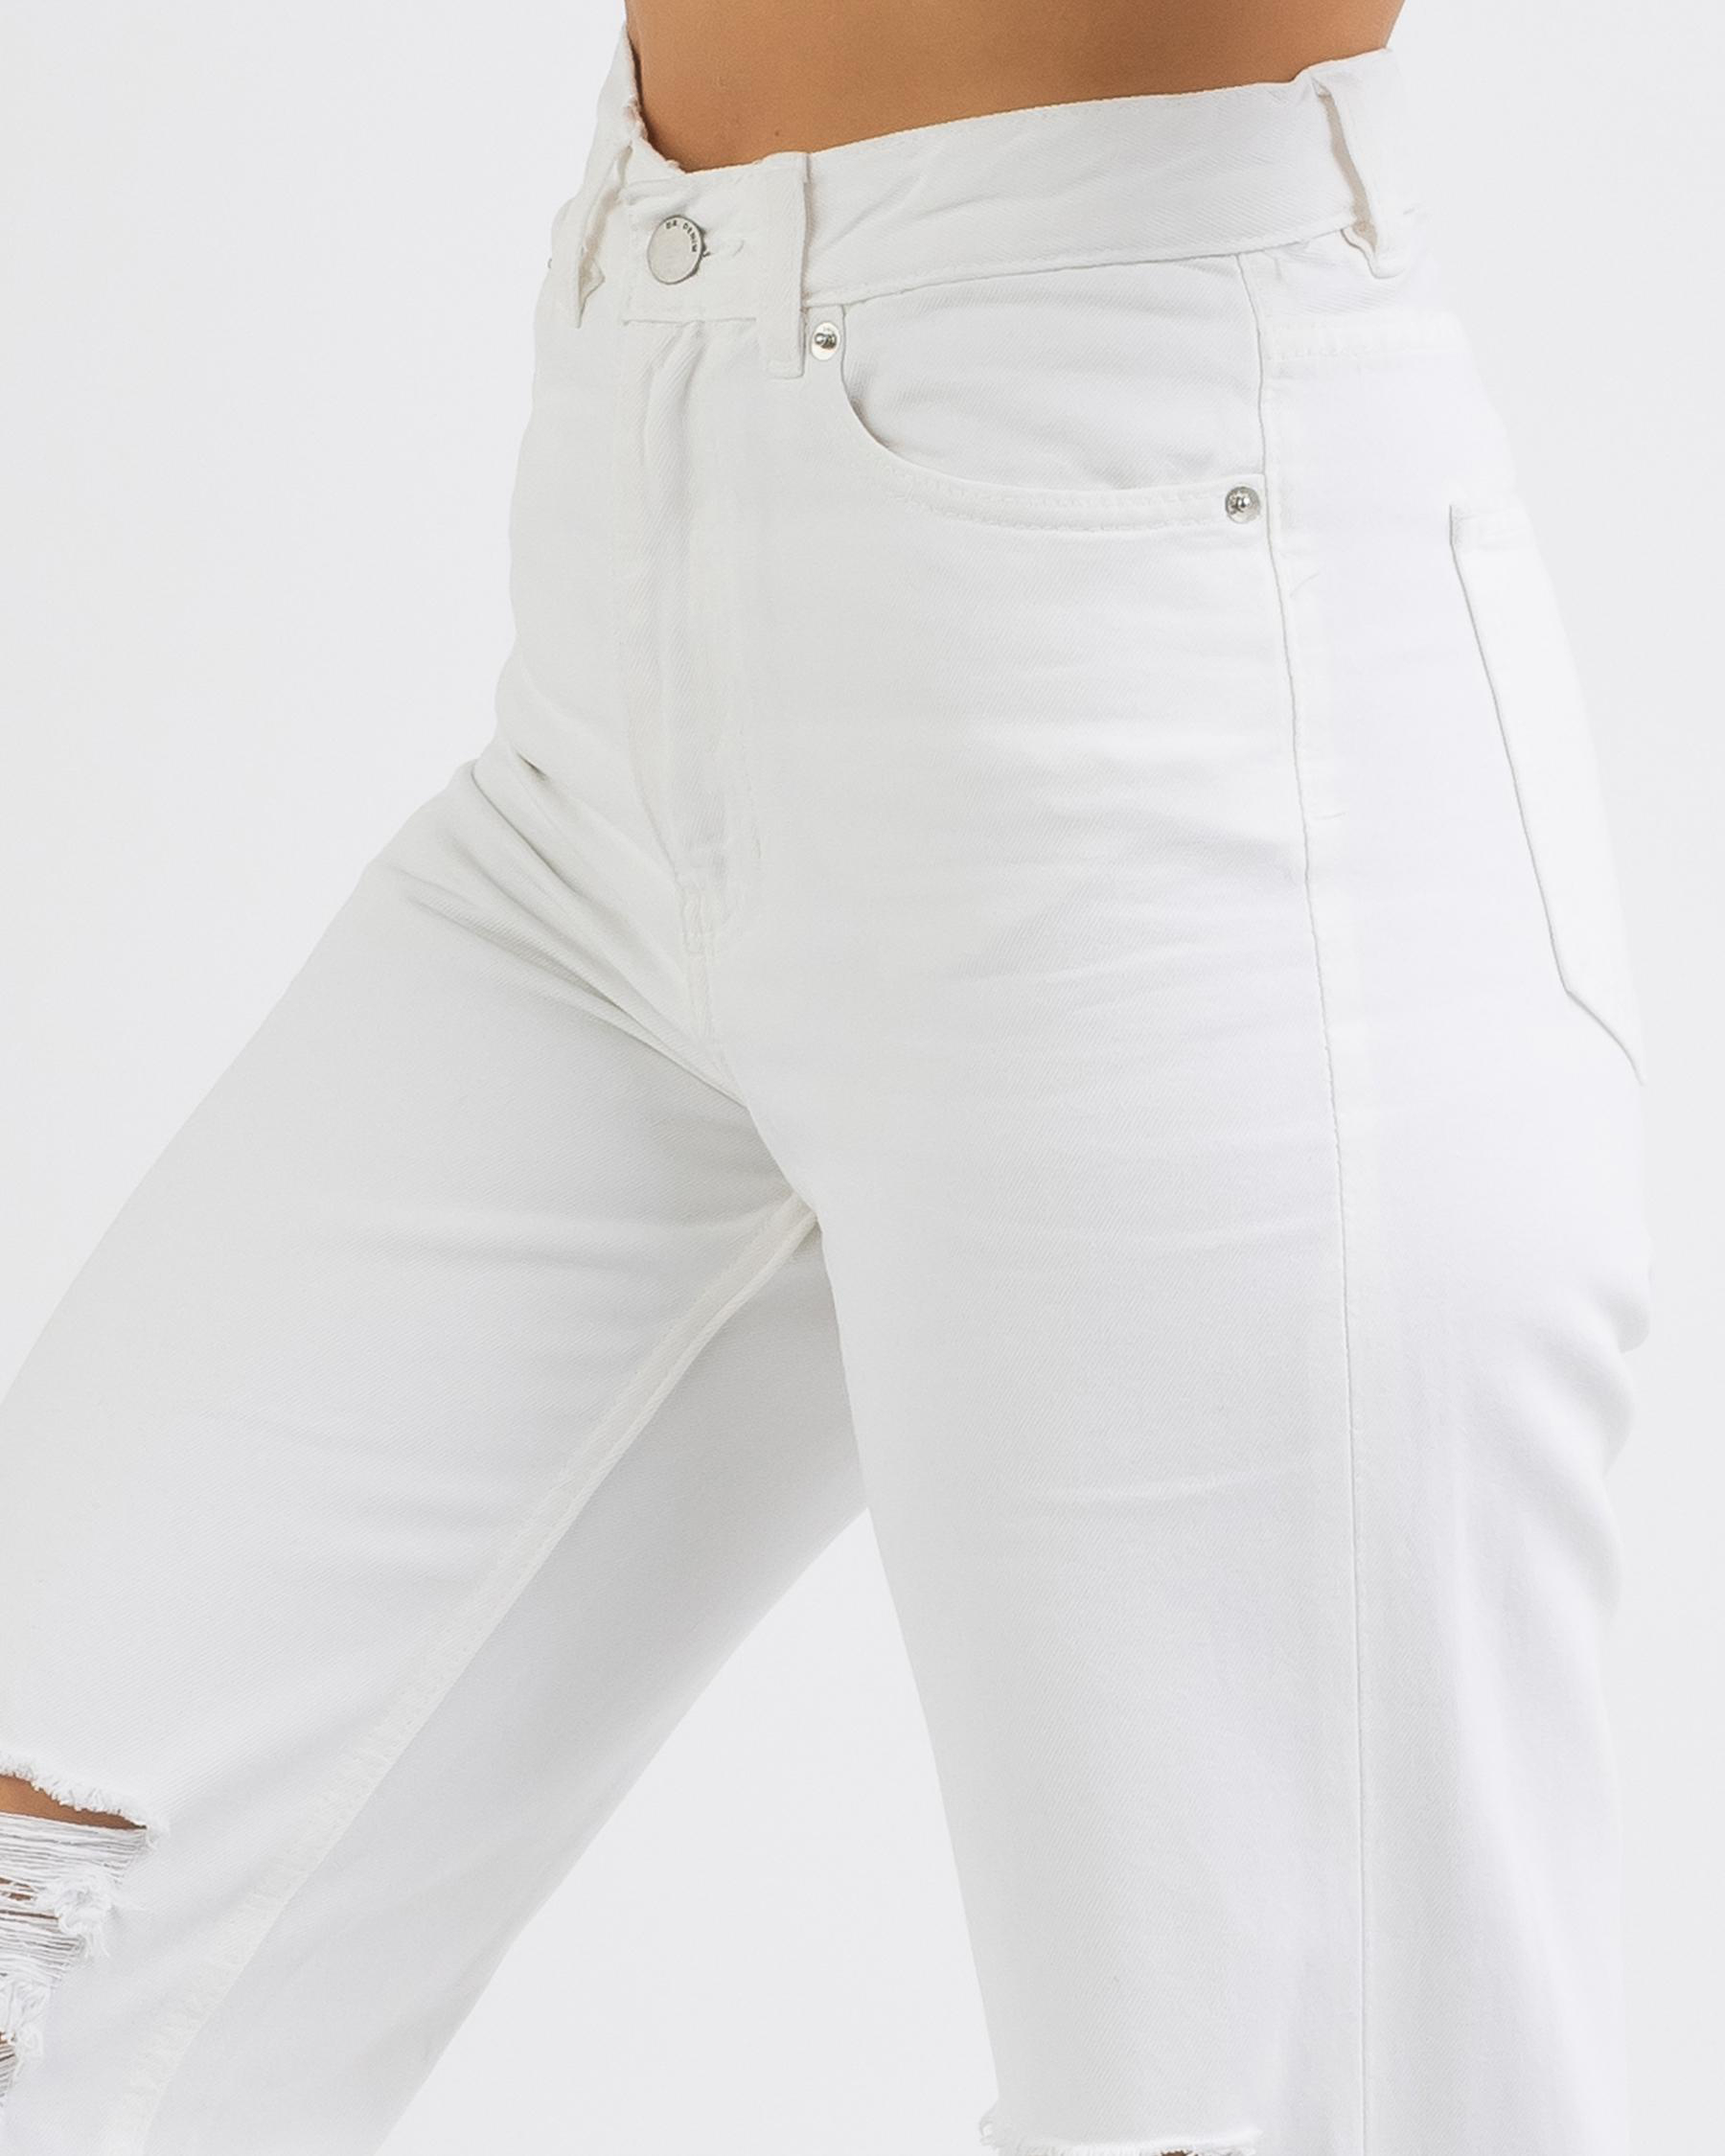 Dr Denim Echo Jeans In White Ripped - Fast Shipping & Easy Returns ...